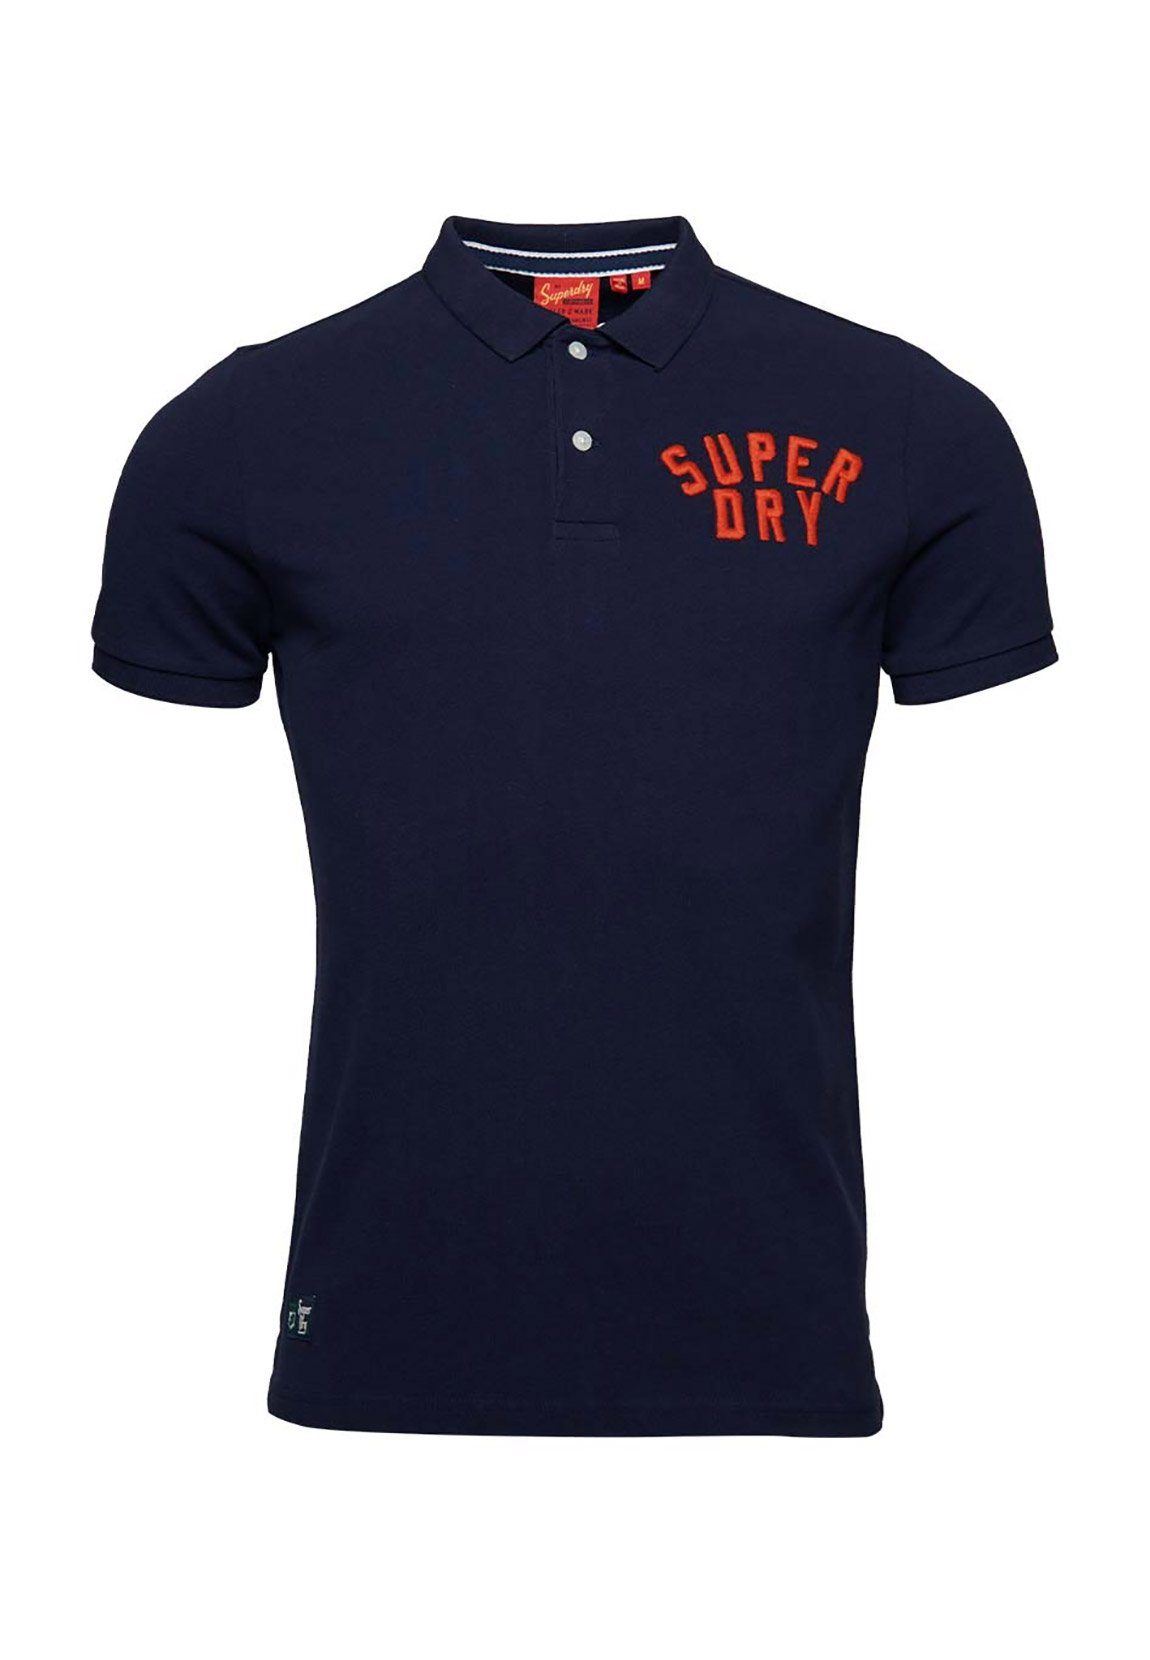 Superdry Polo Herren Navy SUPERSTATE Superdry Poloshirt VINTAGE Eclipse POLO